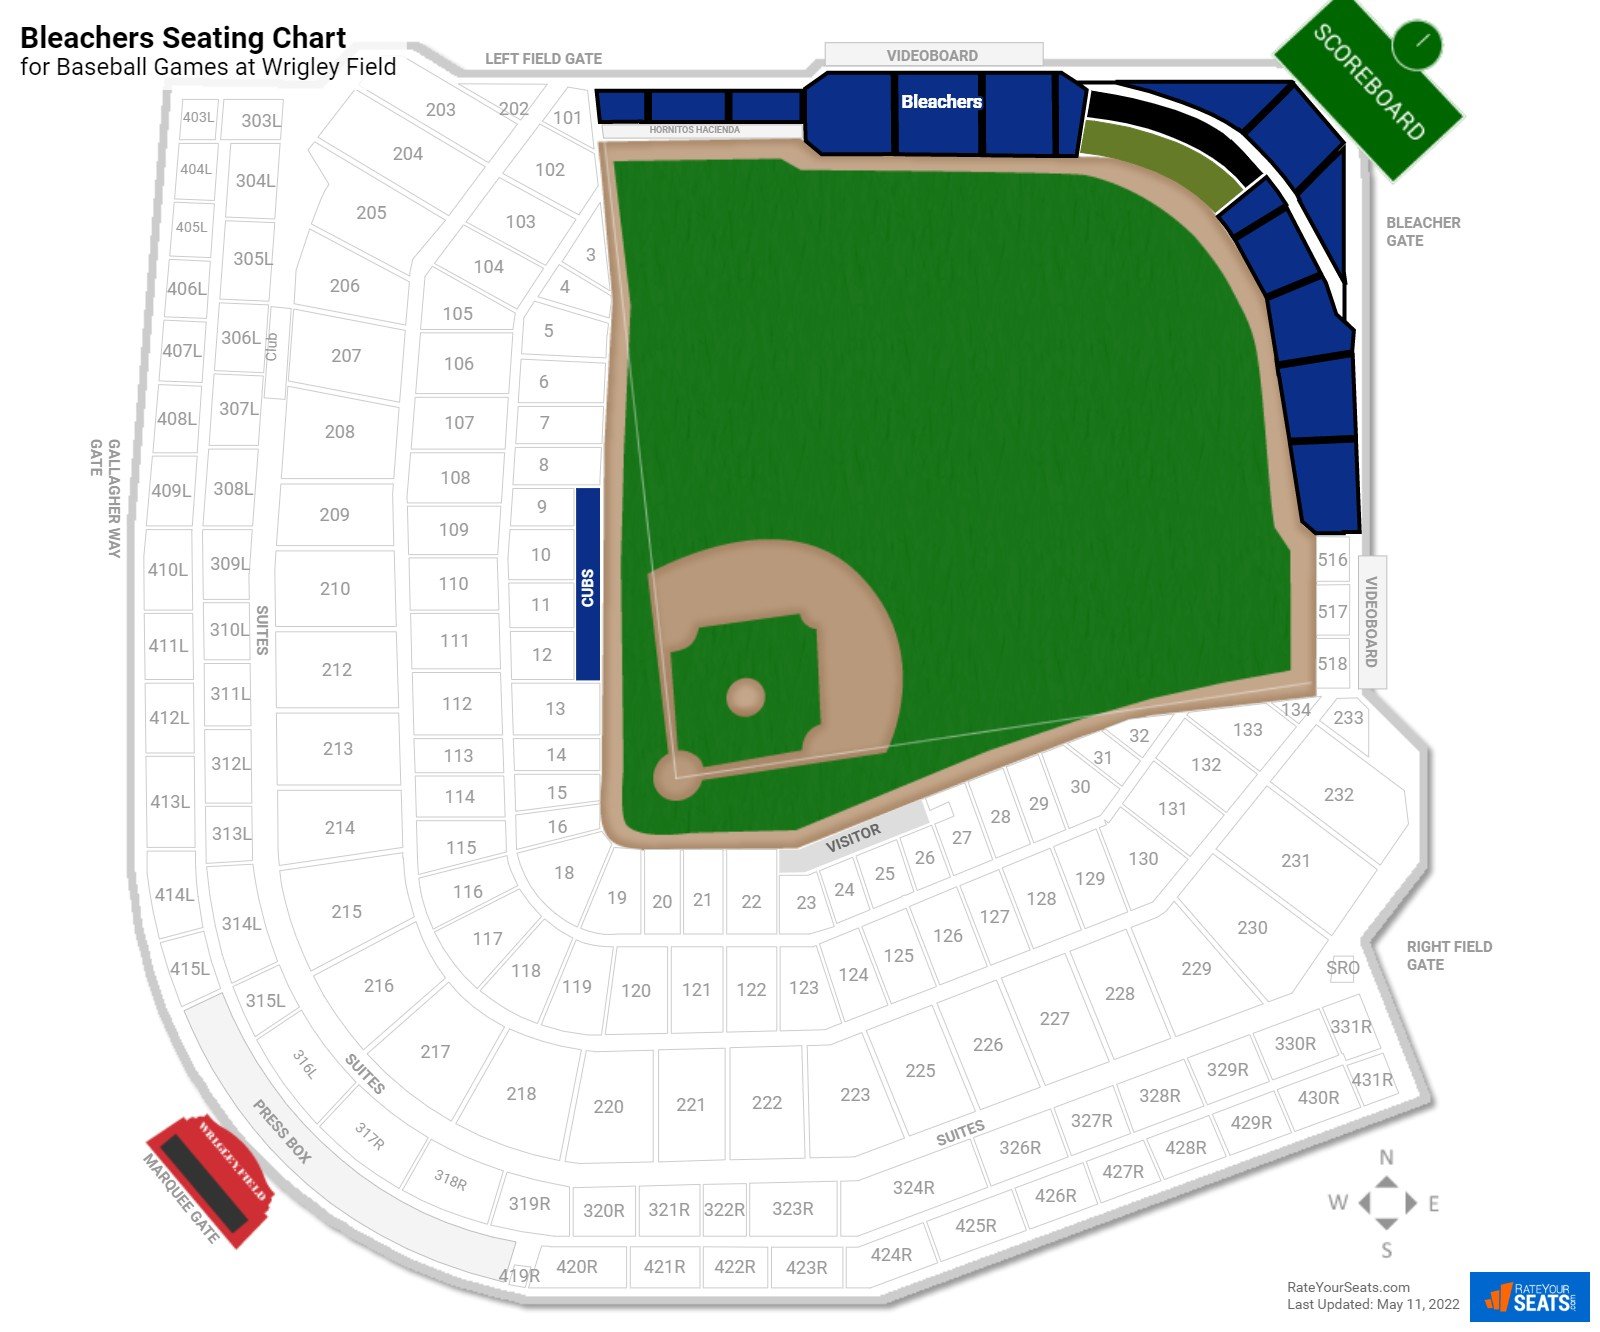 Wrigley Field Seating Guide - Best Seats, Shade, + Obstructed Views